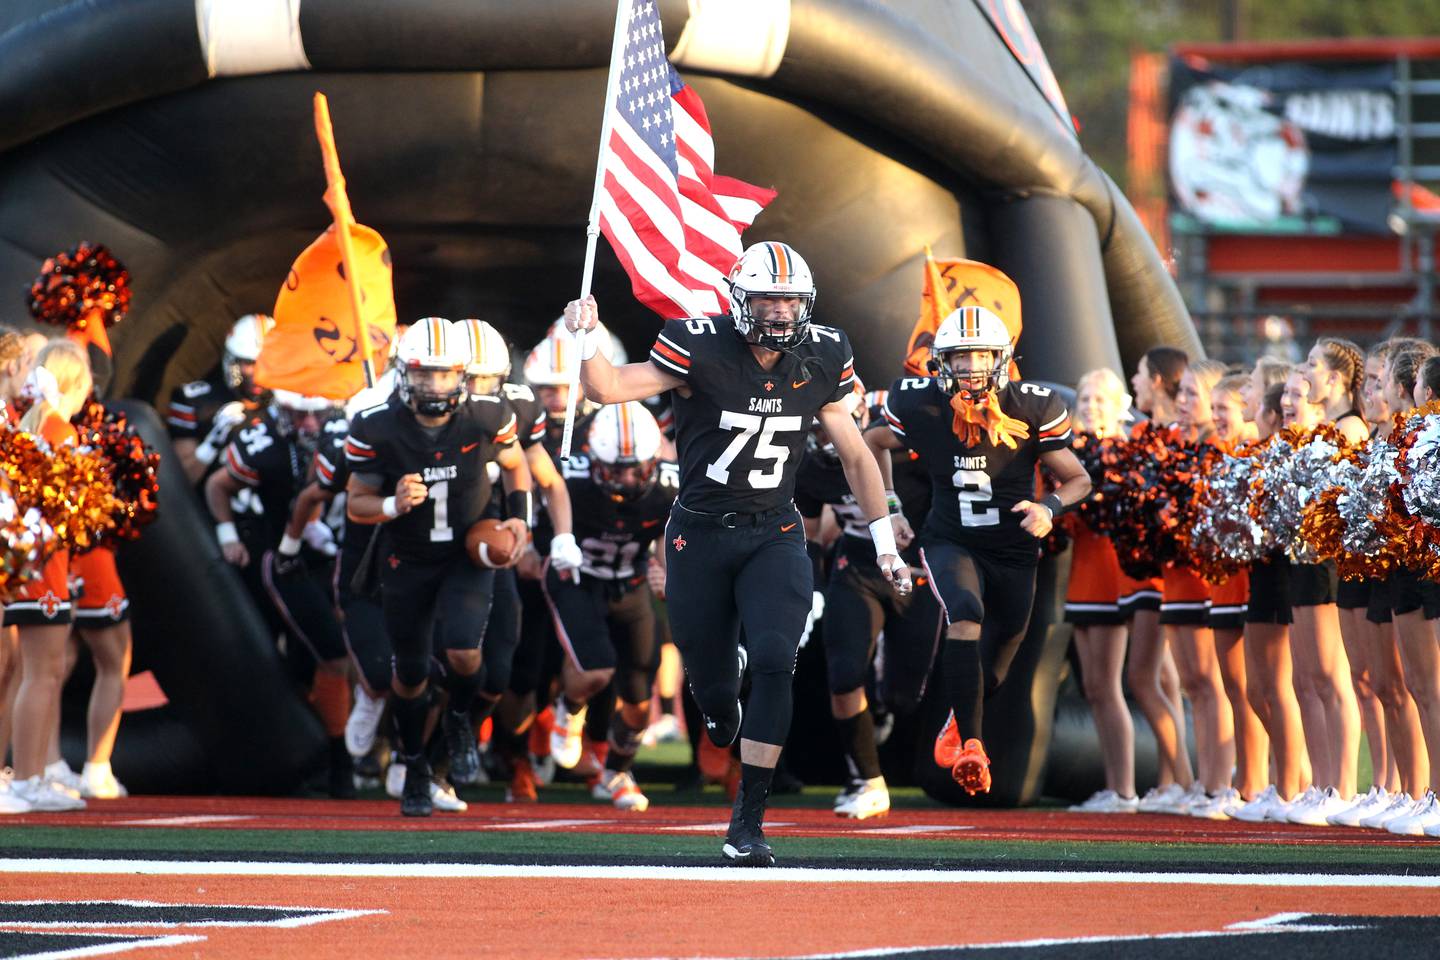 St. Charles East players take the field before their season opener against Lincoln-Way Central at home on Friday, Aug. 26, 2022.